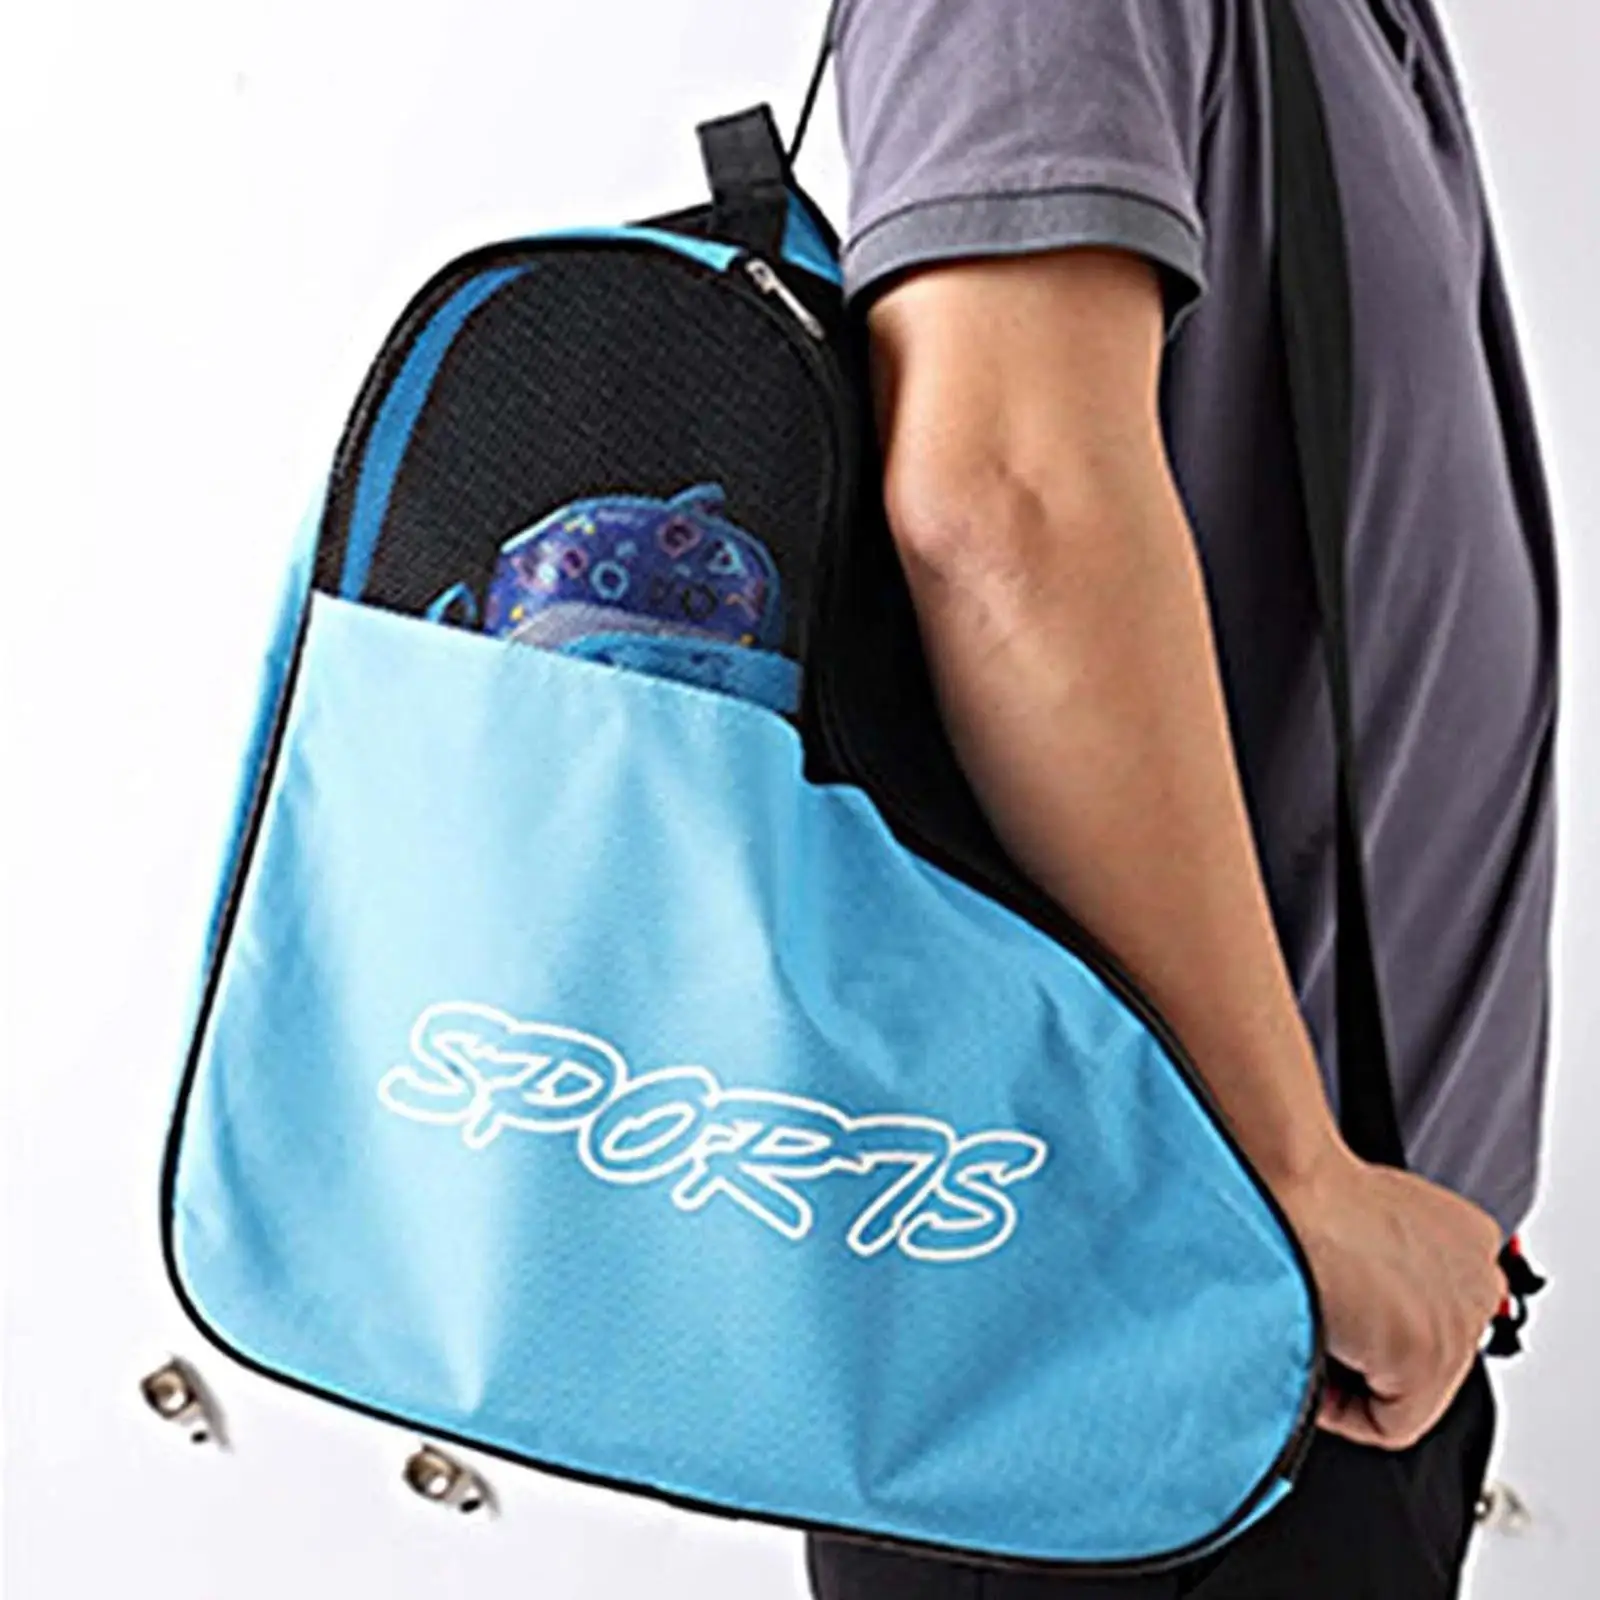 Roller Skating Bag Sports Accessories Portable Adjustable Ice Inline Roller Skate Fashion Bags With Large Capacity Pockets